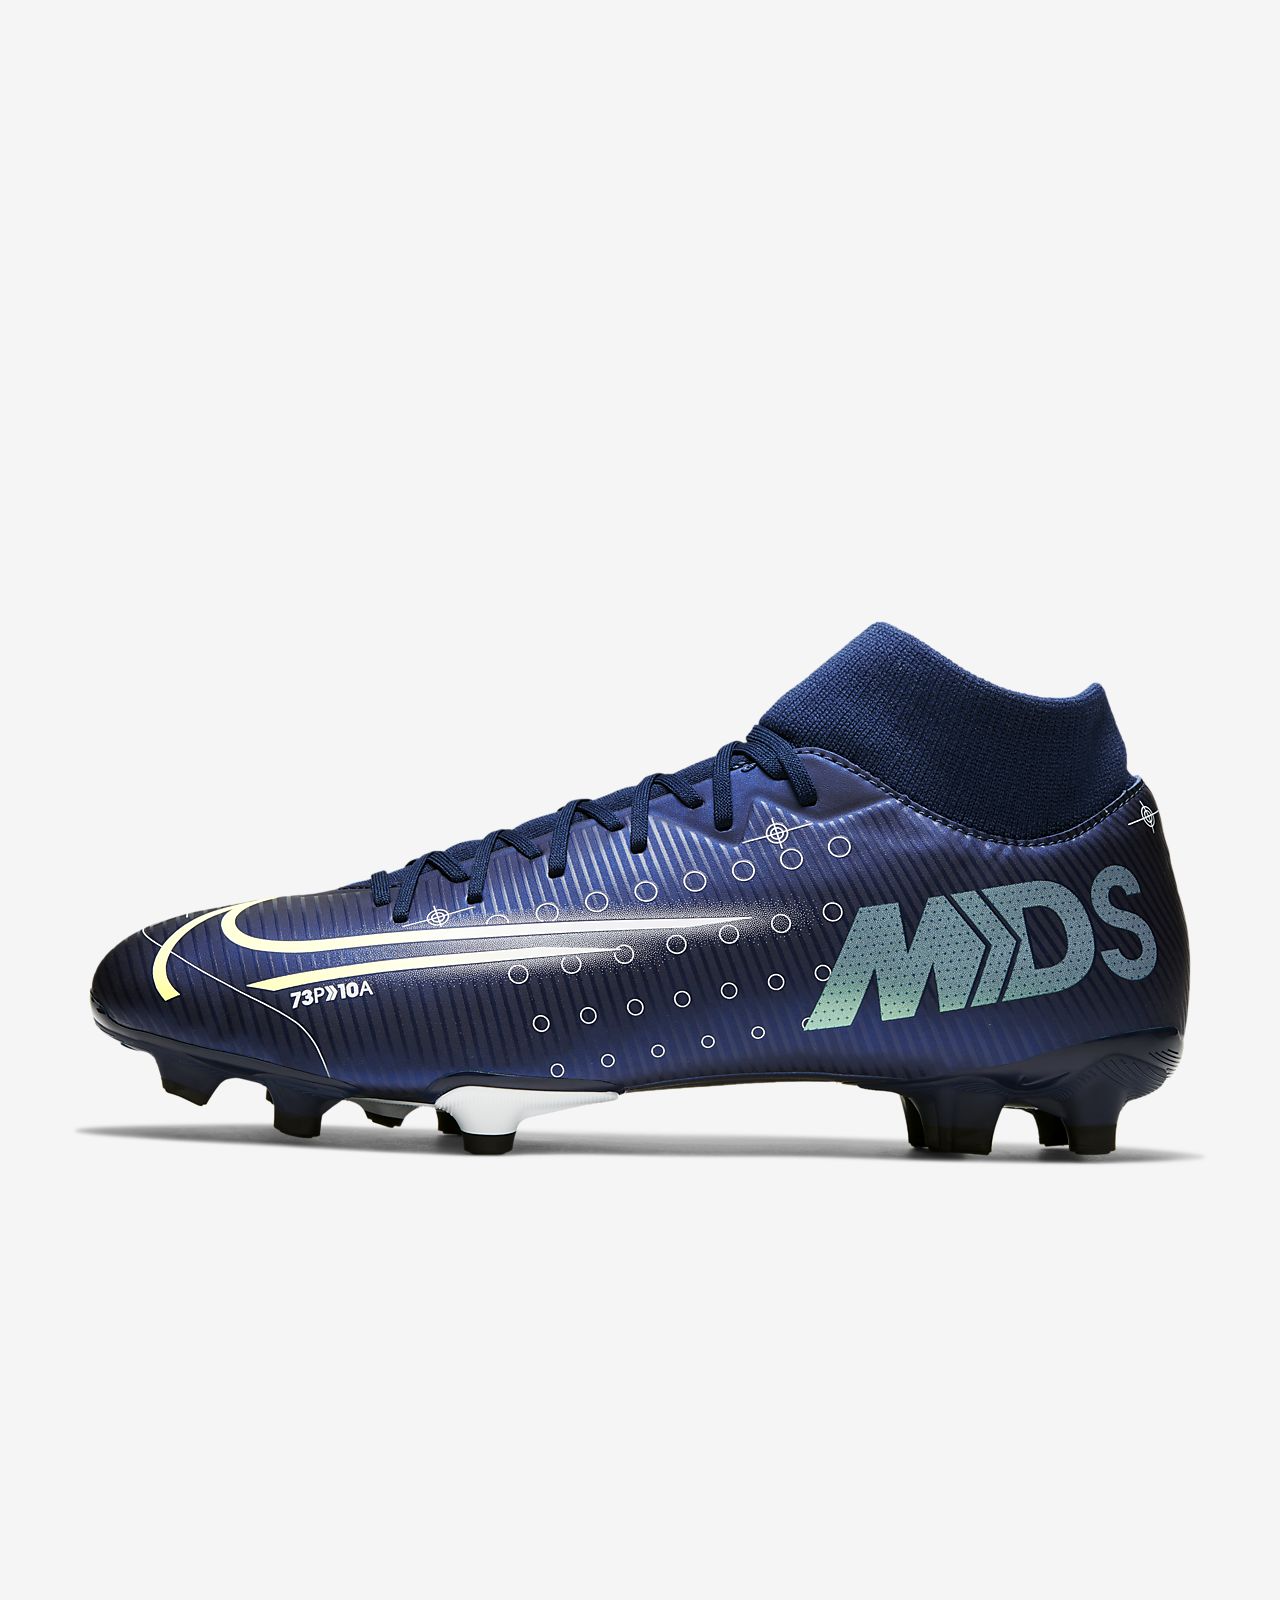 Nike Mercurial Superfly 7 Pro AG Pro VoetbalDirect.nl